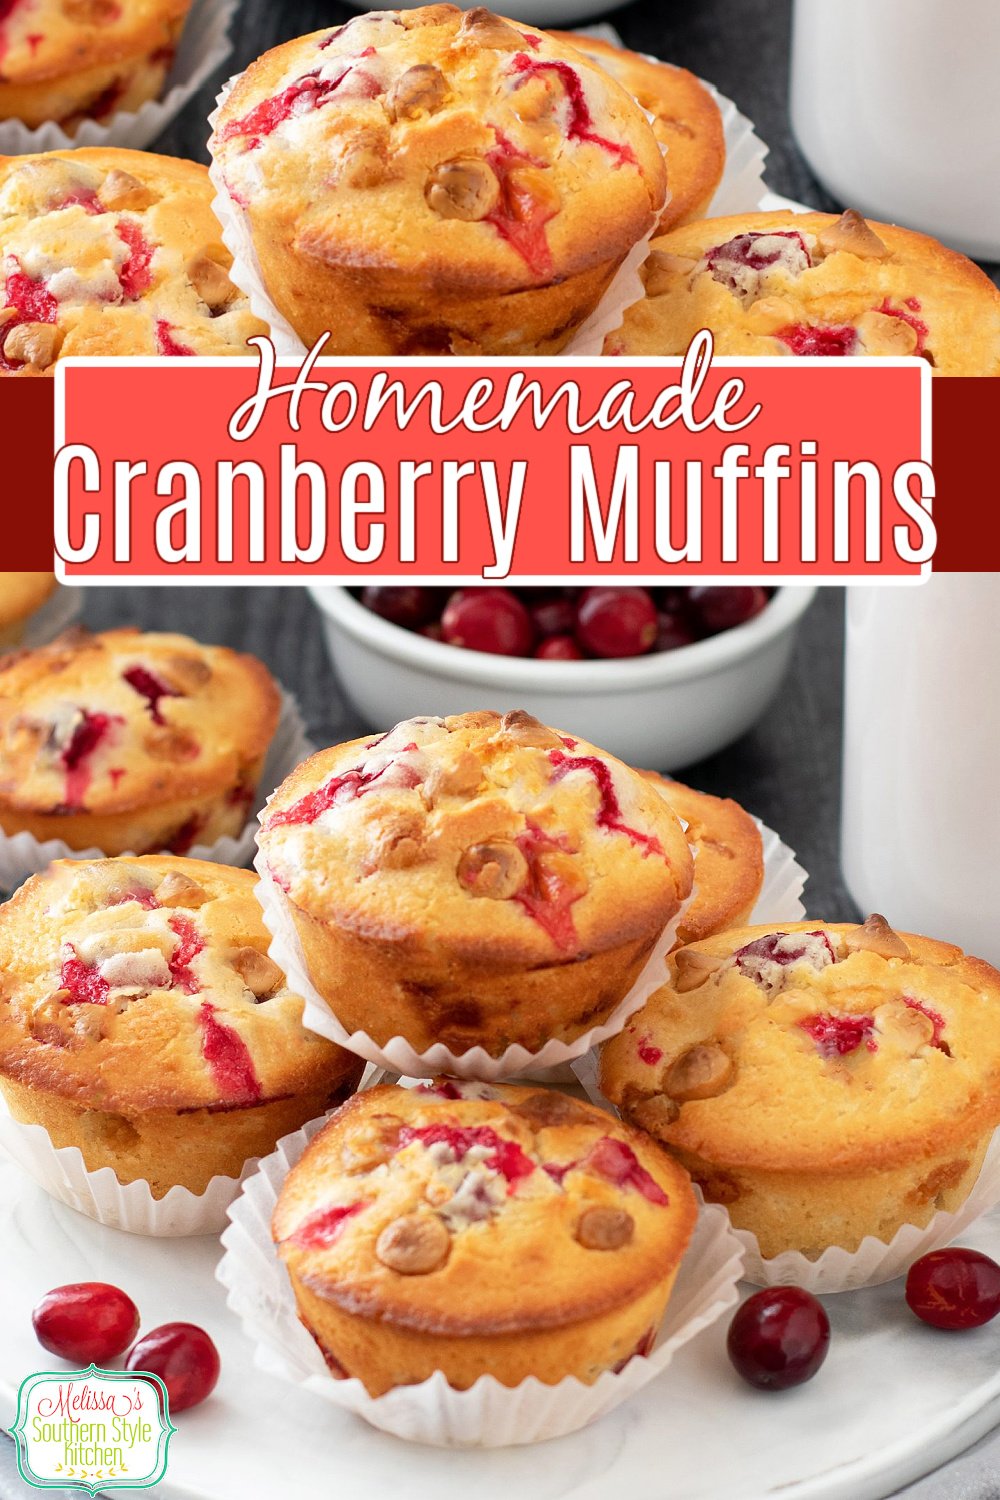 These homemade white chocolate chip Cranberry Muffins are a delicious seasonal option for breakfast, brunch, tea time or dessert #cranberrymuffins #cranberries #whitechocolate #breakfastrecipes #brunchrecipes #easyrecipes #muffinrecipes via @melissasssk